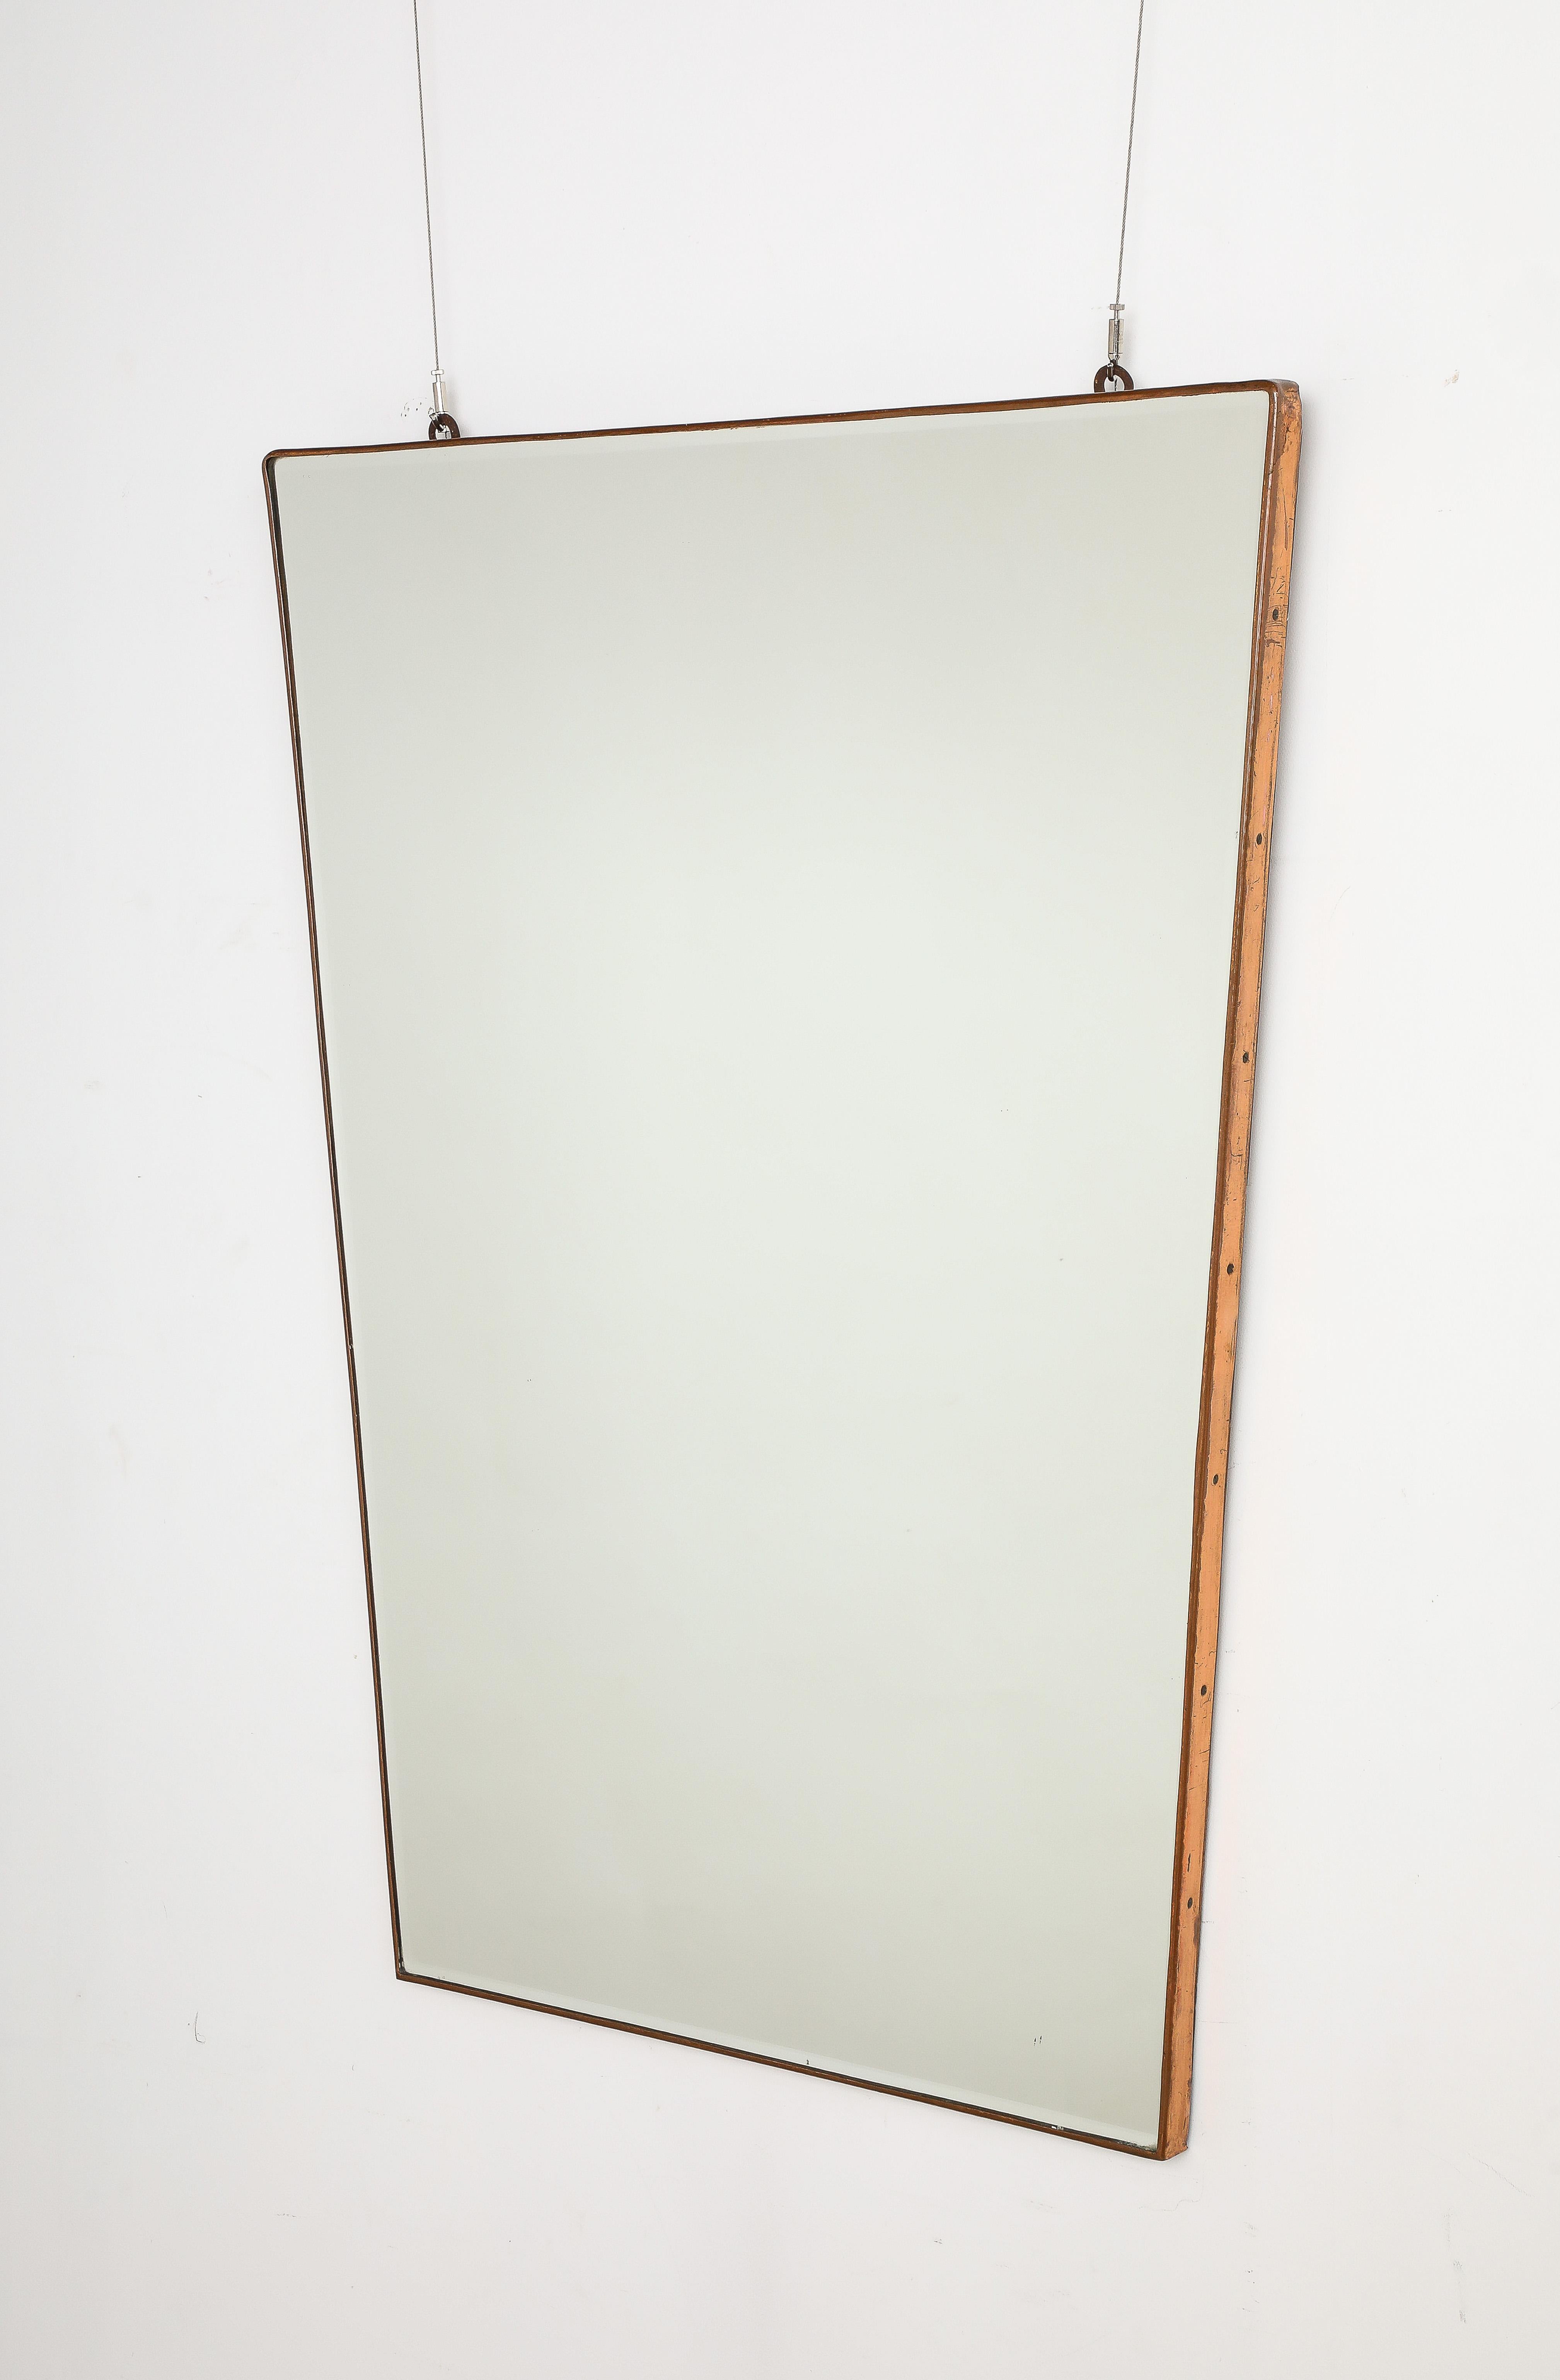 A rare copper framed trapezoid shaped mirror made by Fontana Arte, circa 1940.  The frame is widest at the top and tapers toward the base.  Of very simple and elegant form.  Of grand scale, would fit any interior style, antique, modern or